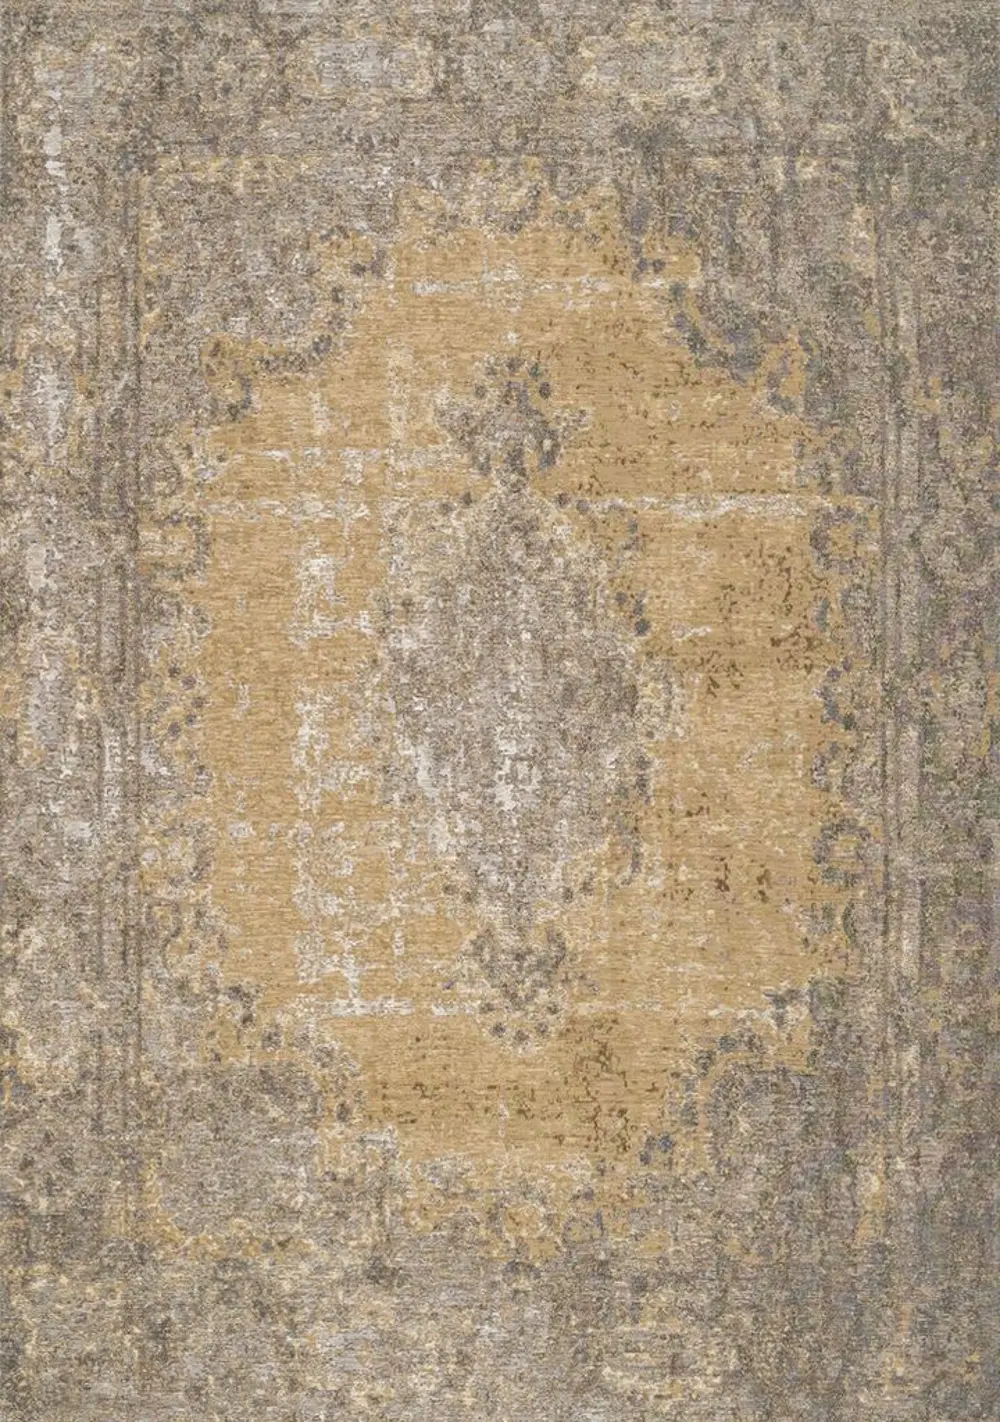 8 x 11 Large Distressed Yellow and Gray Area Rug - Cathedral-1